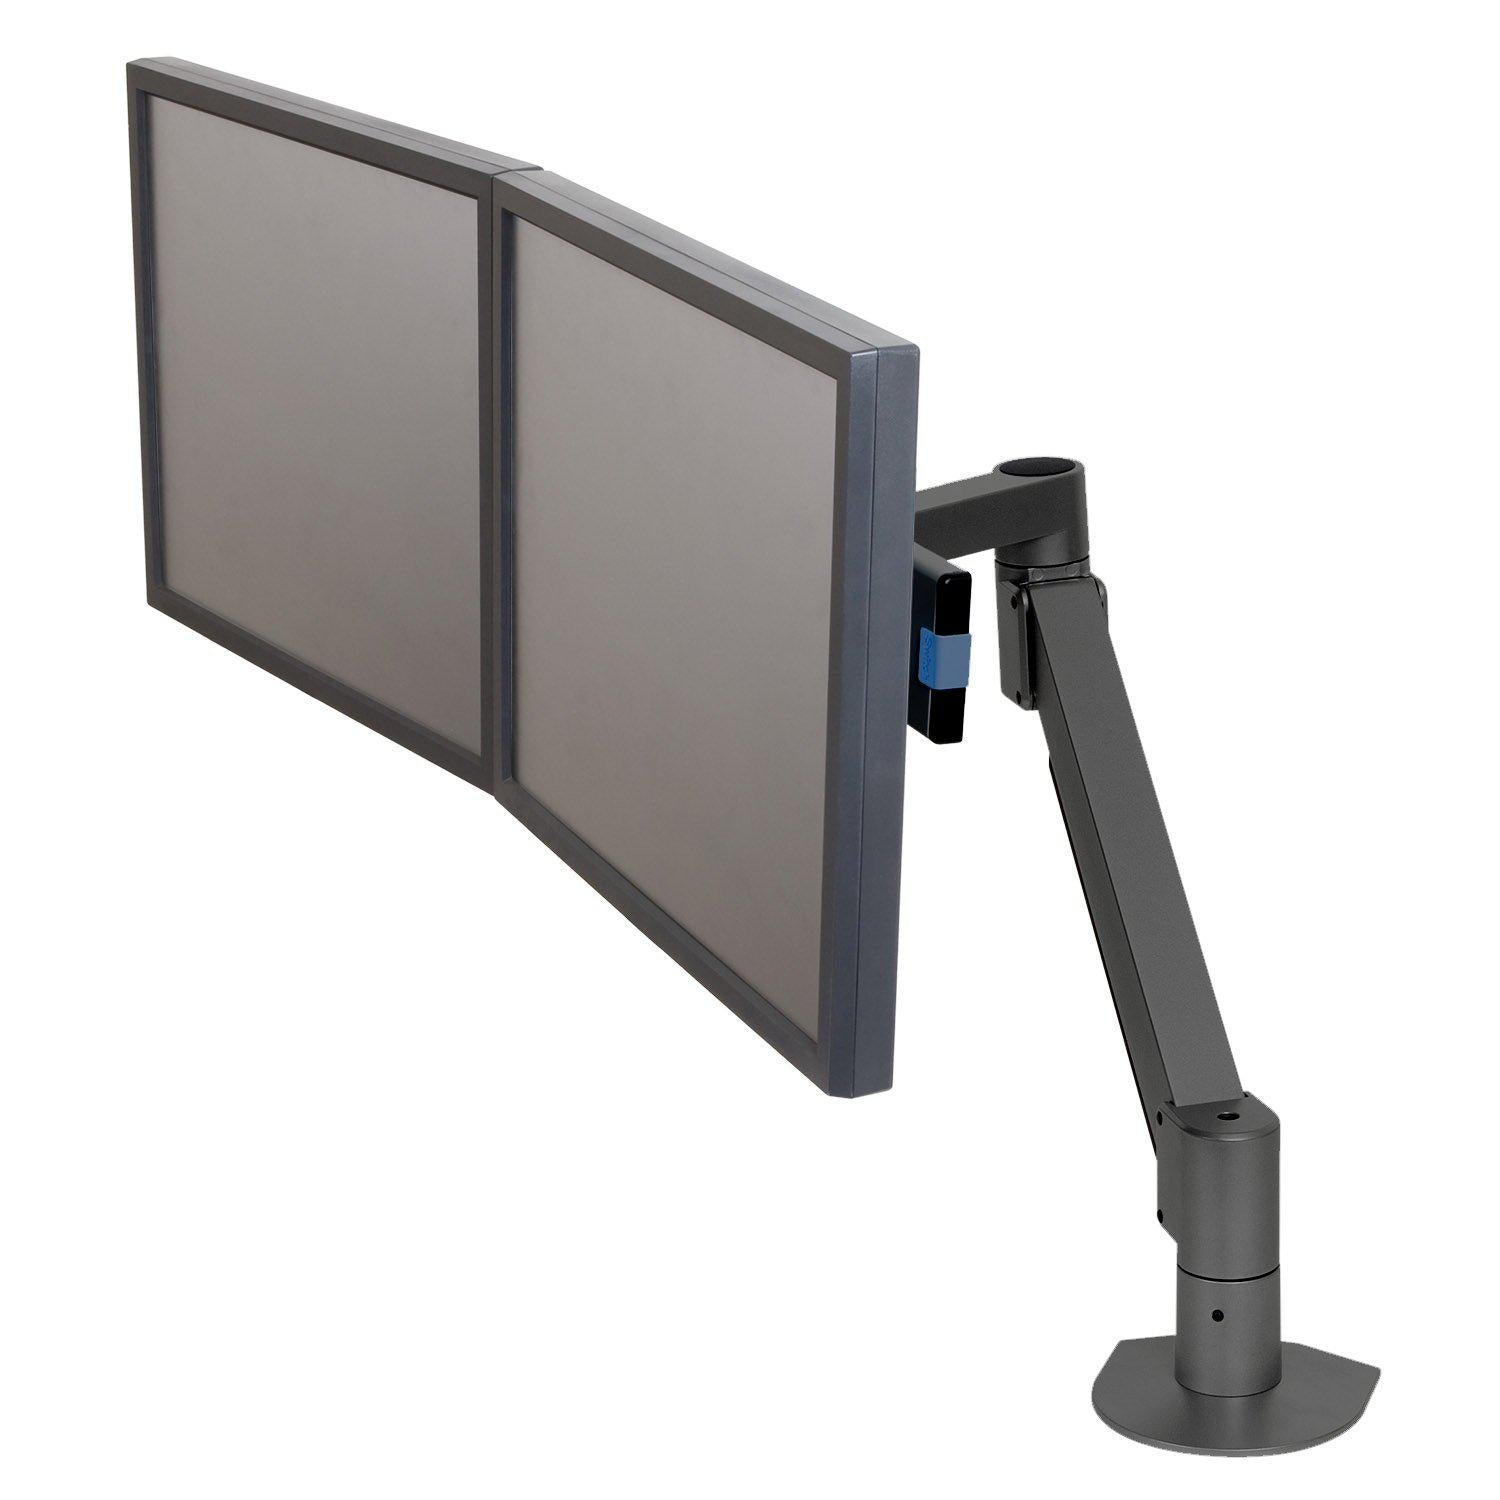 Titan Dual Flat Panel Monitor Arm for Esports Gaming Desks and Shoutcaster Stations, FREE SHIPPING